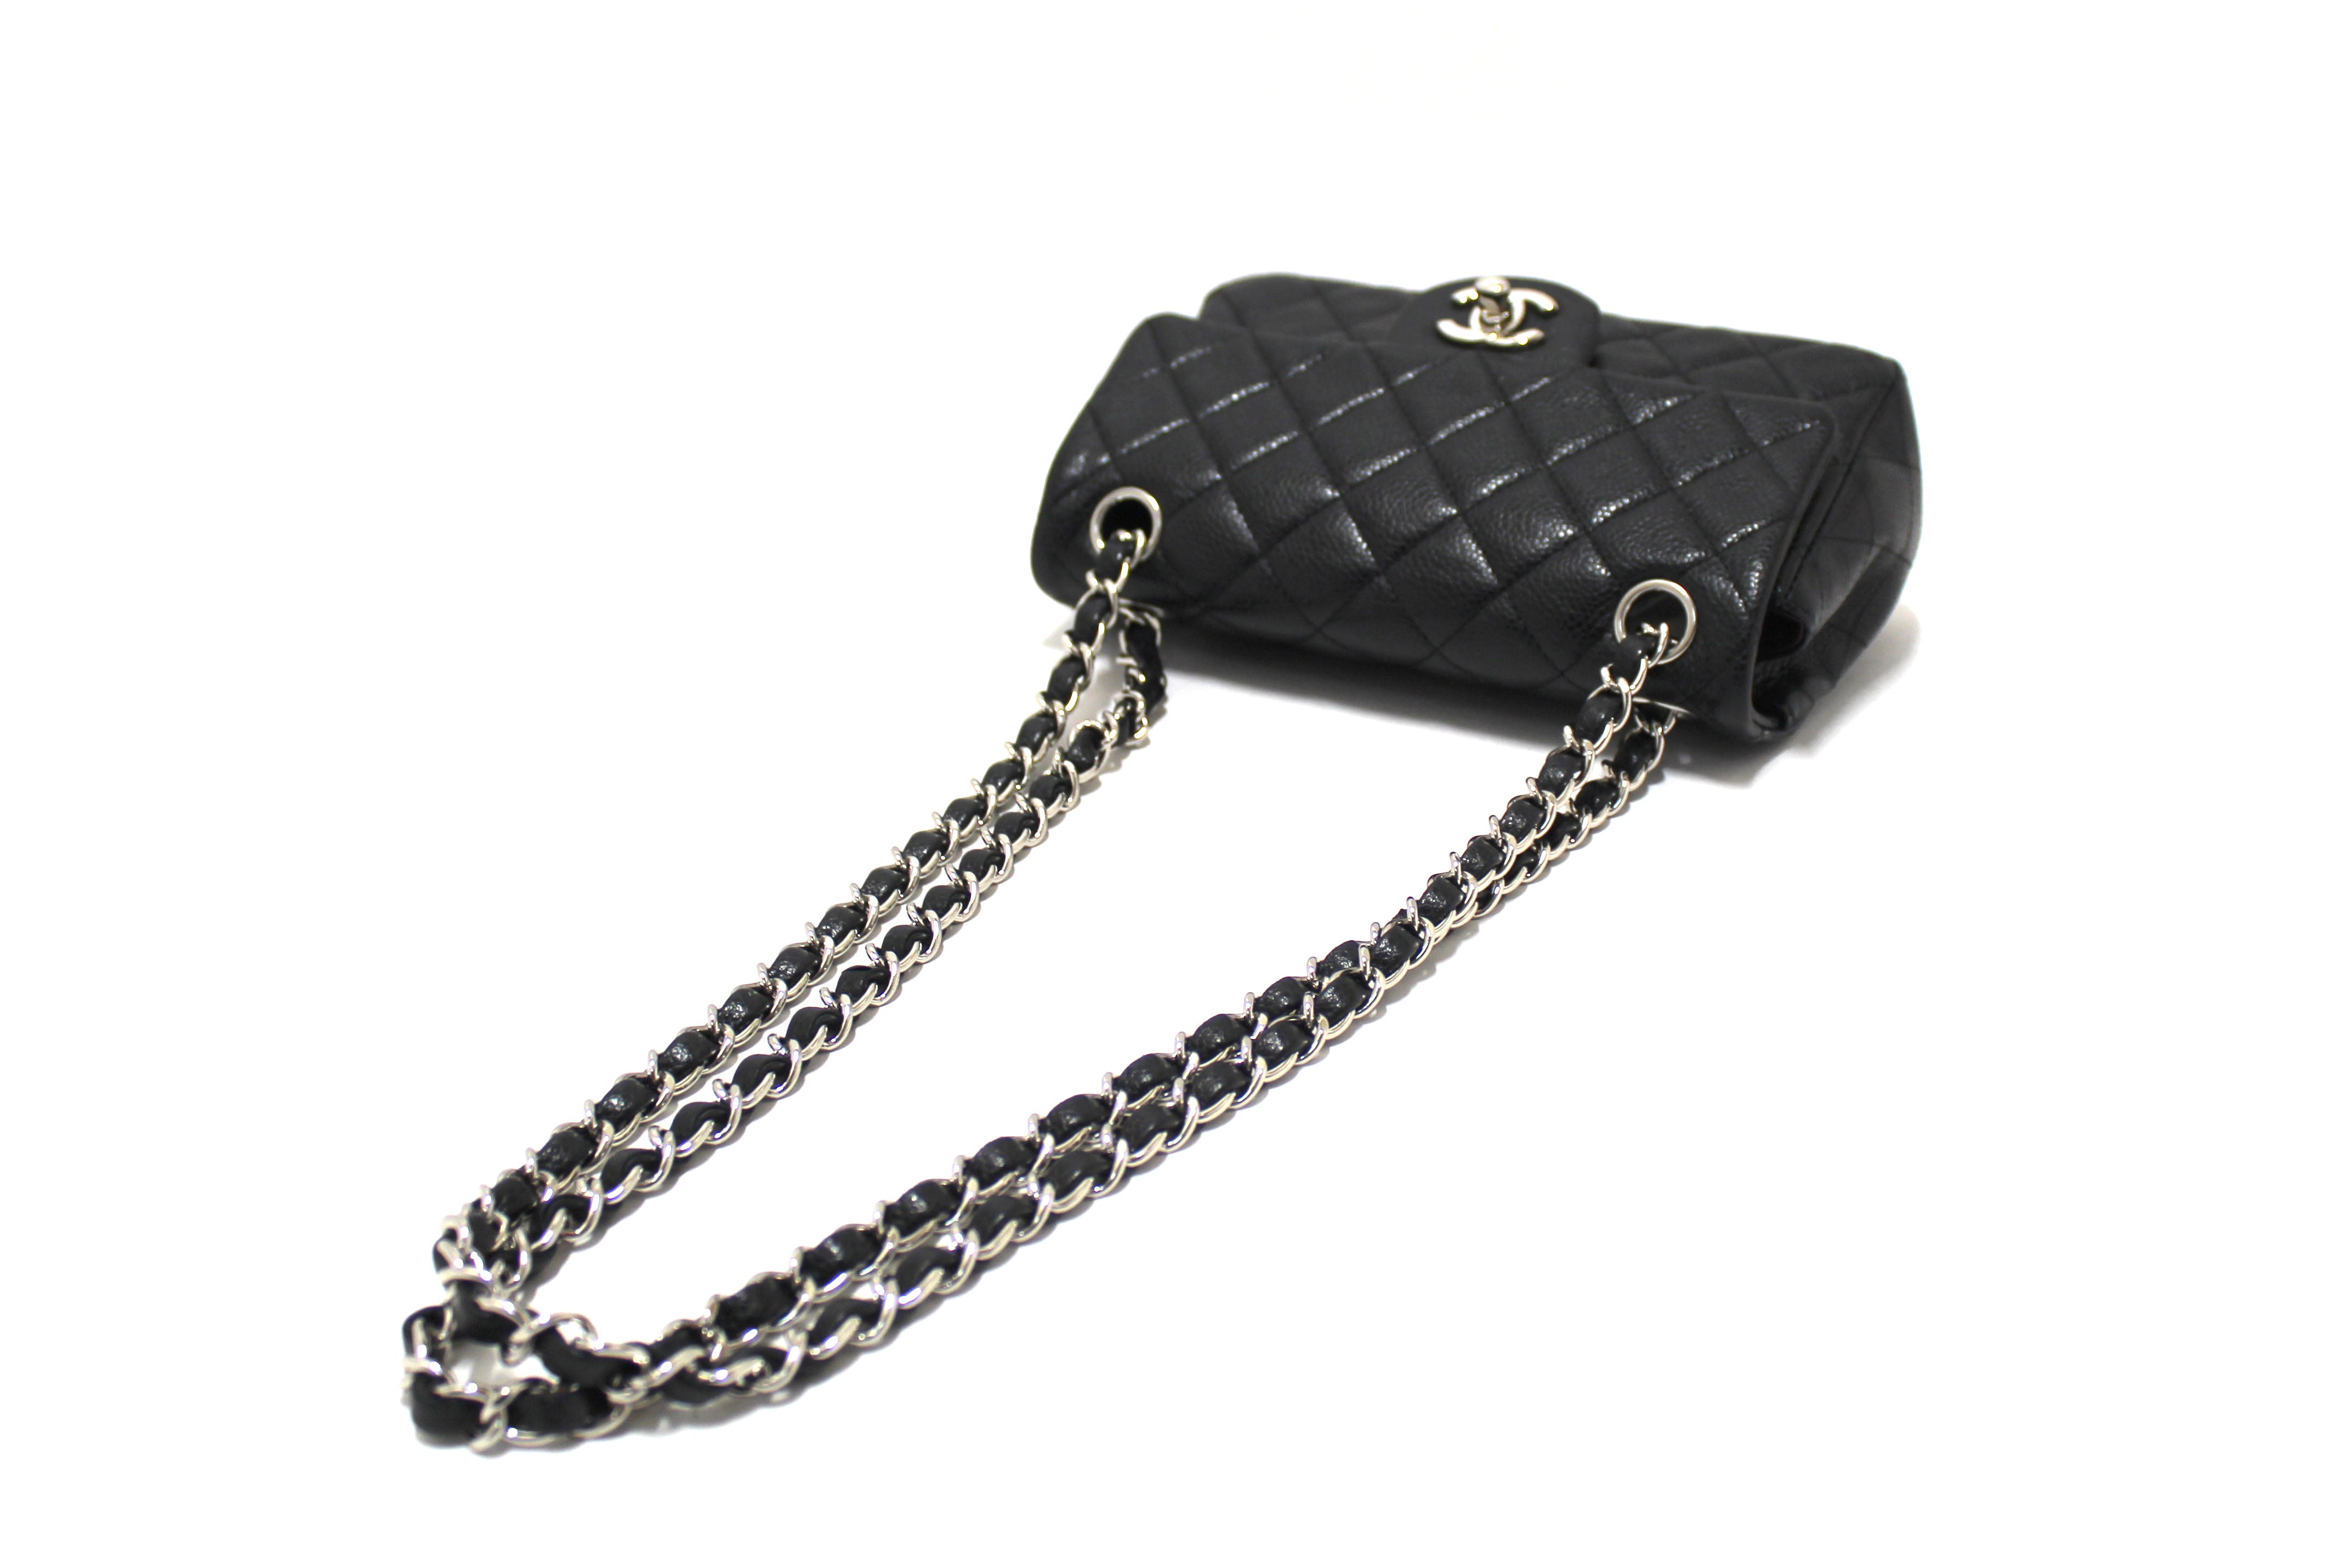 Chanel Black Quilted Caviar Leather Classic Mini Rectangle Flap Crossbody Bag